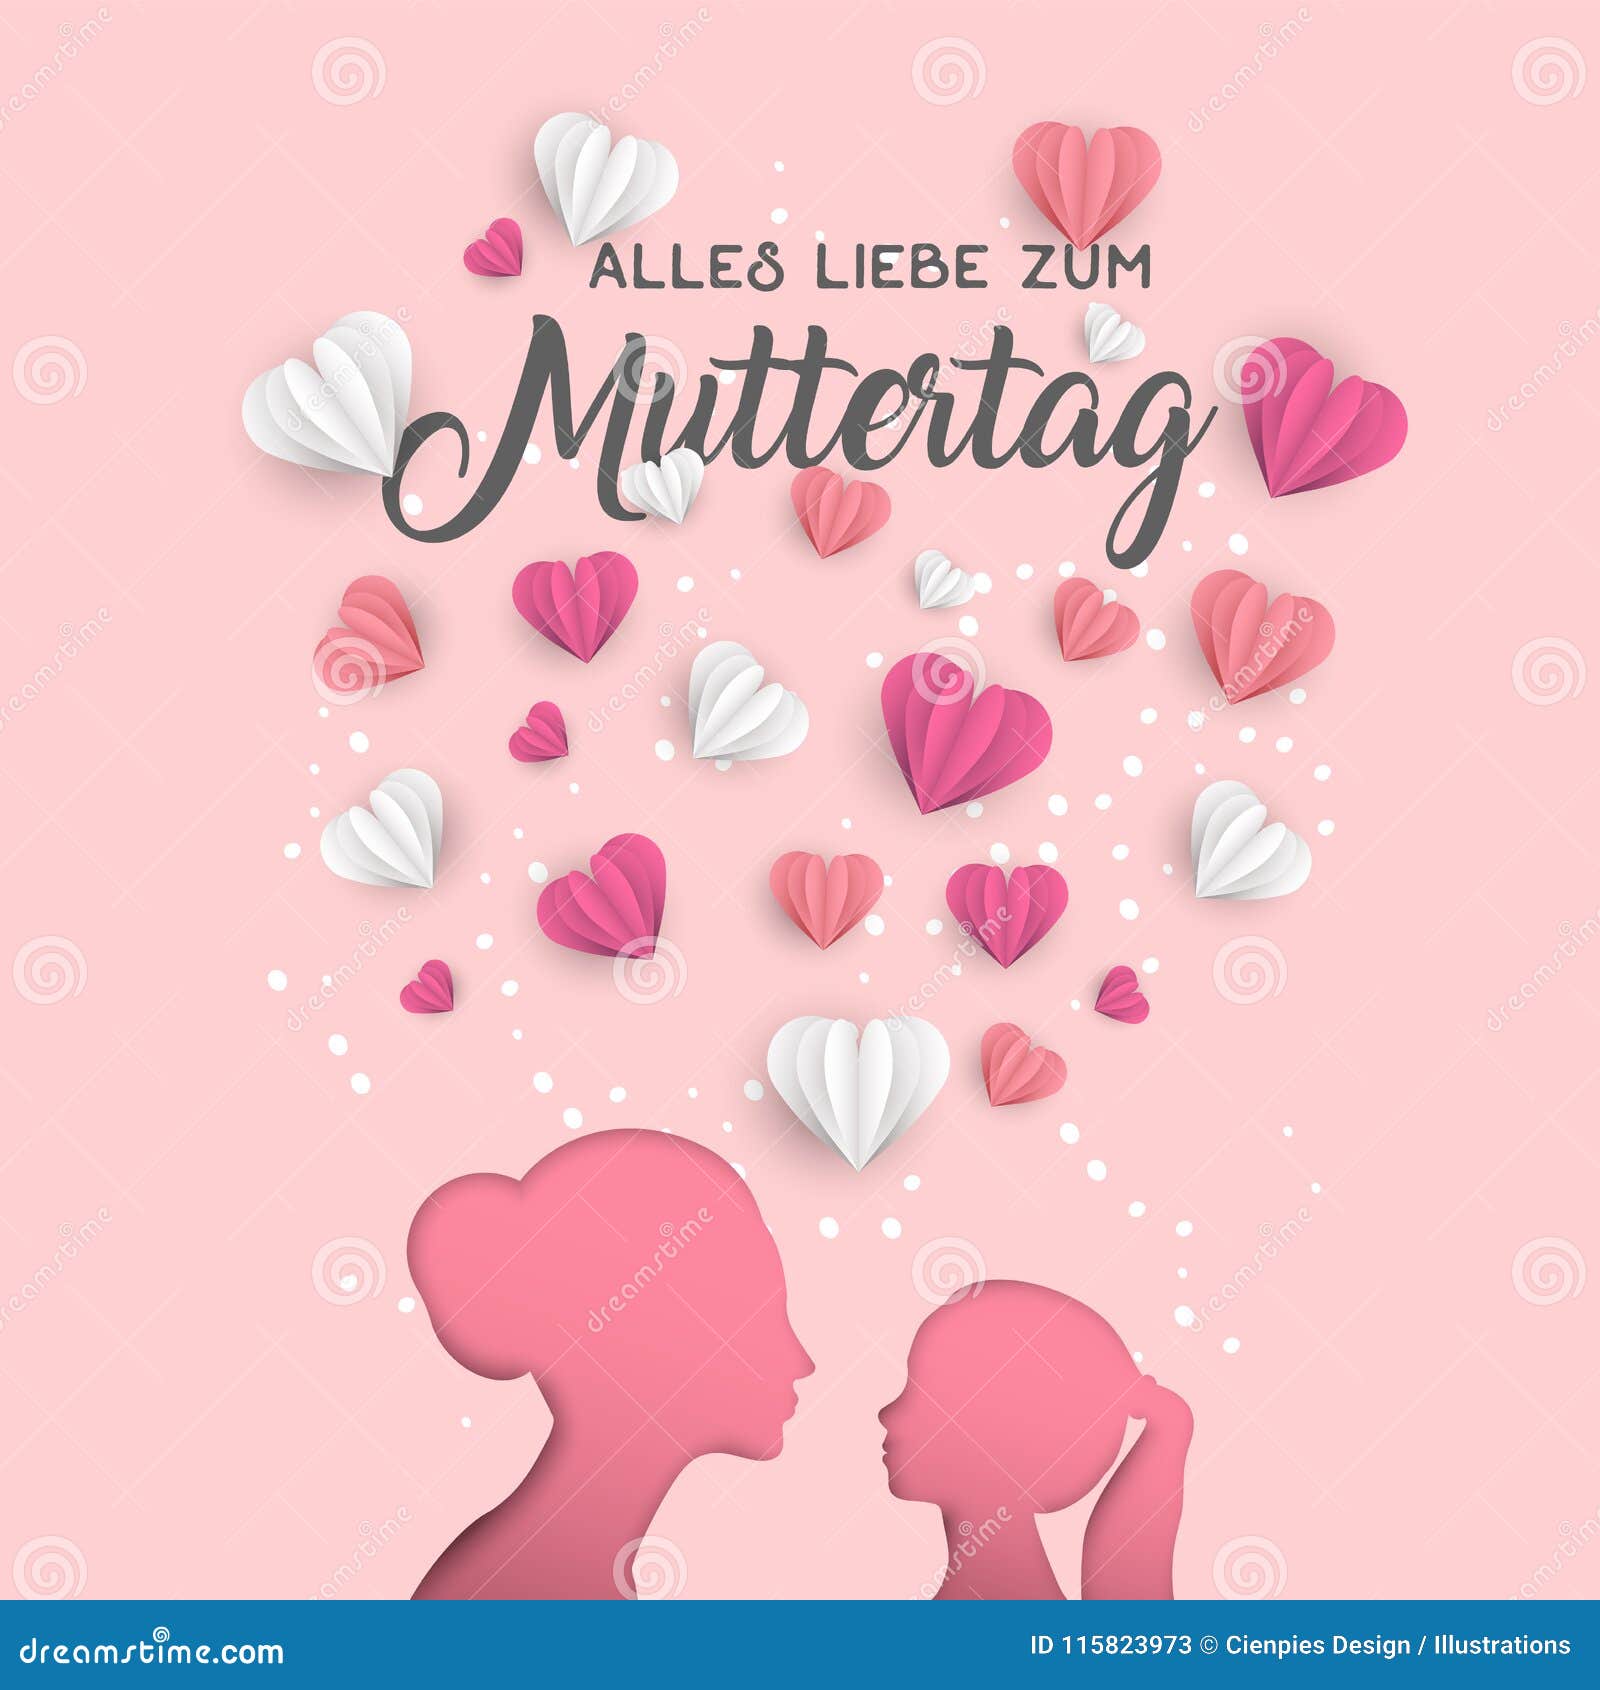 Mother Day German Card For Family Holiday Love Stock Vector Illustration Of Happy Card